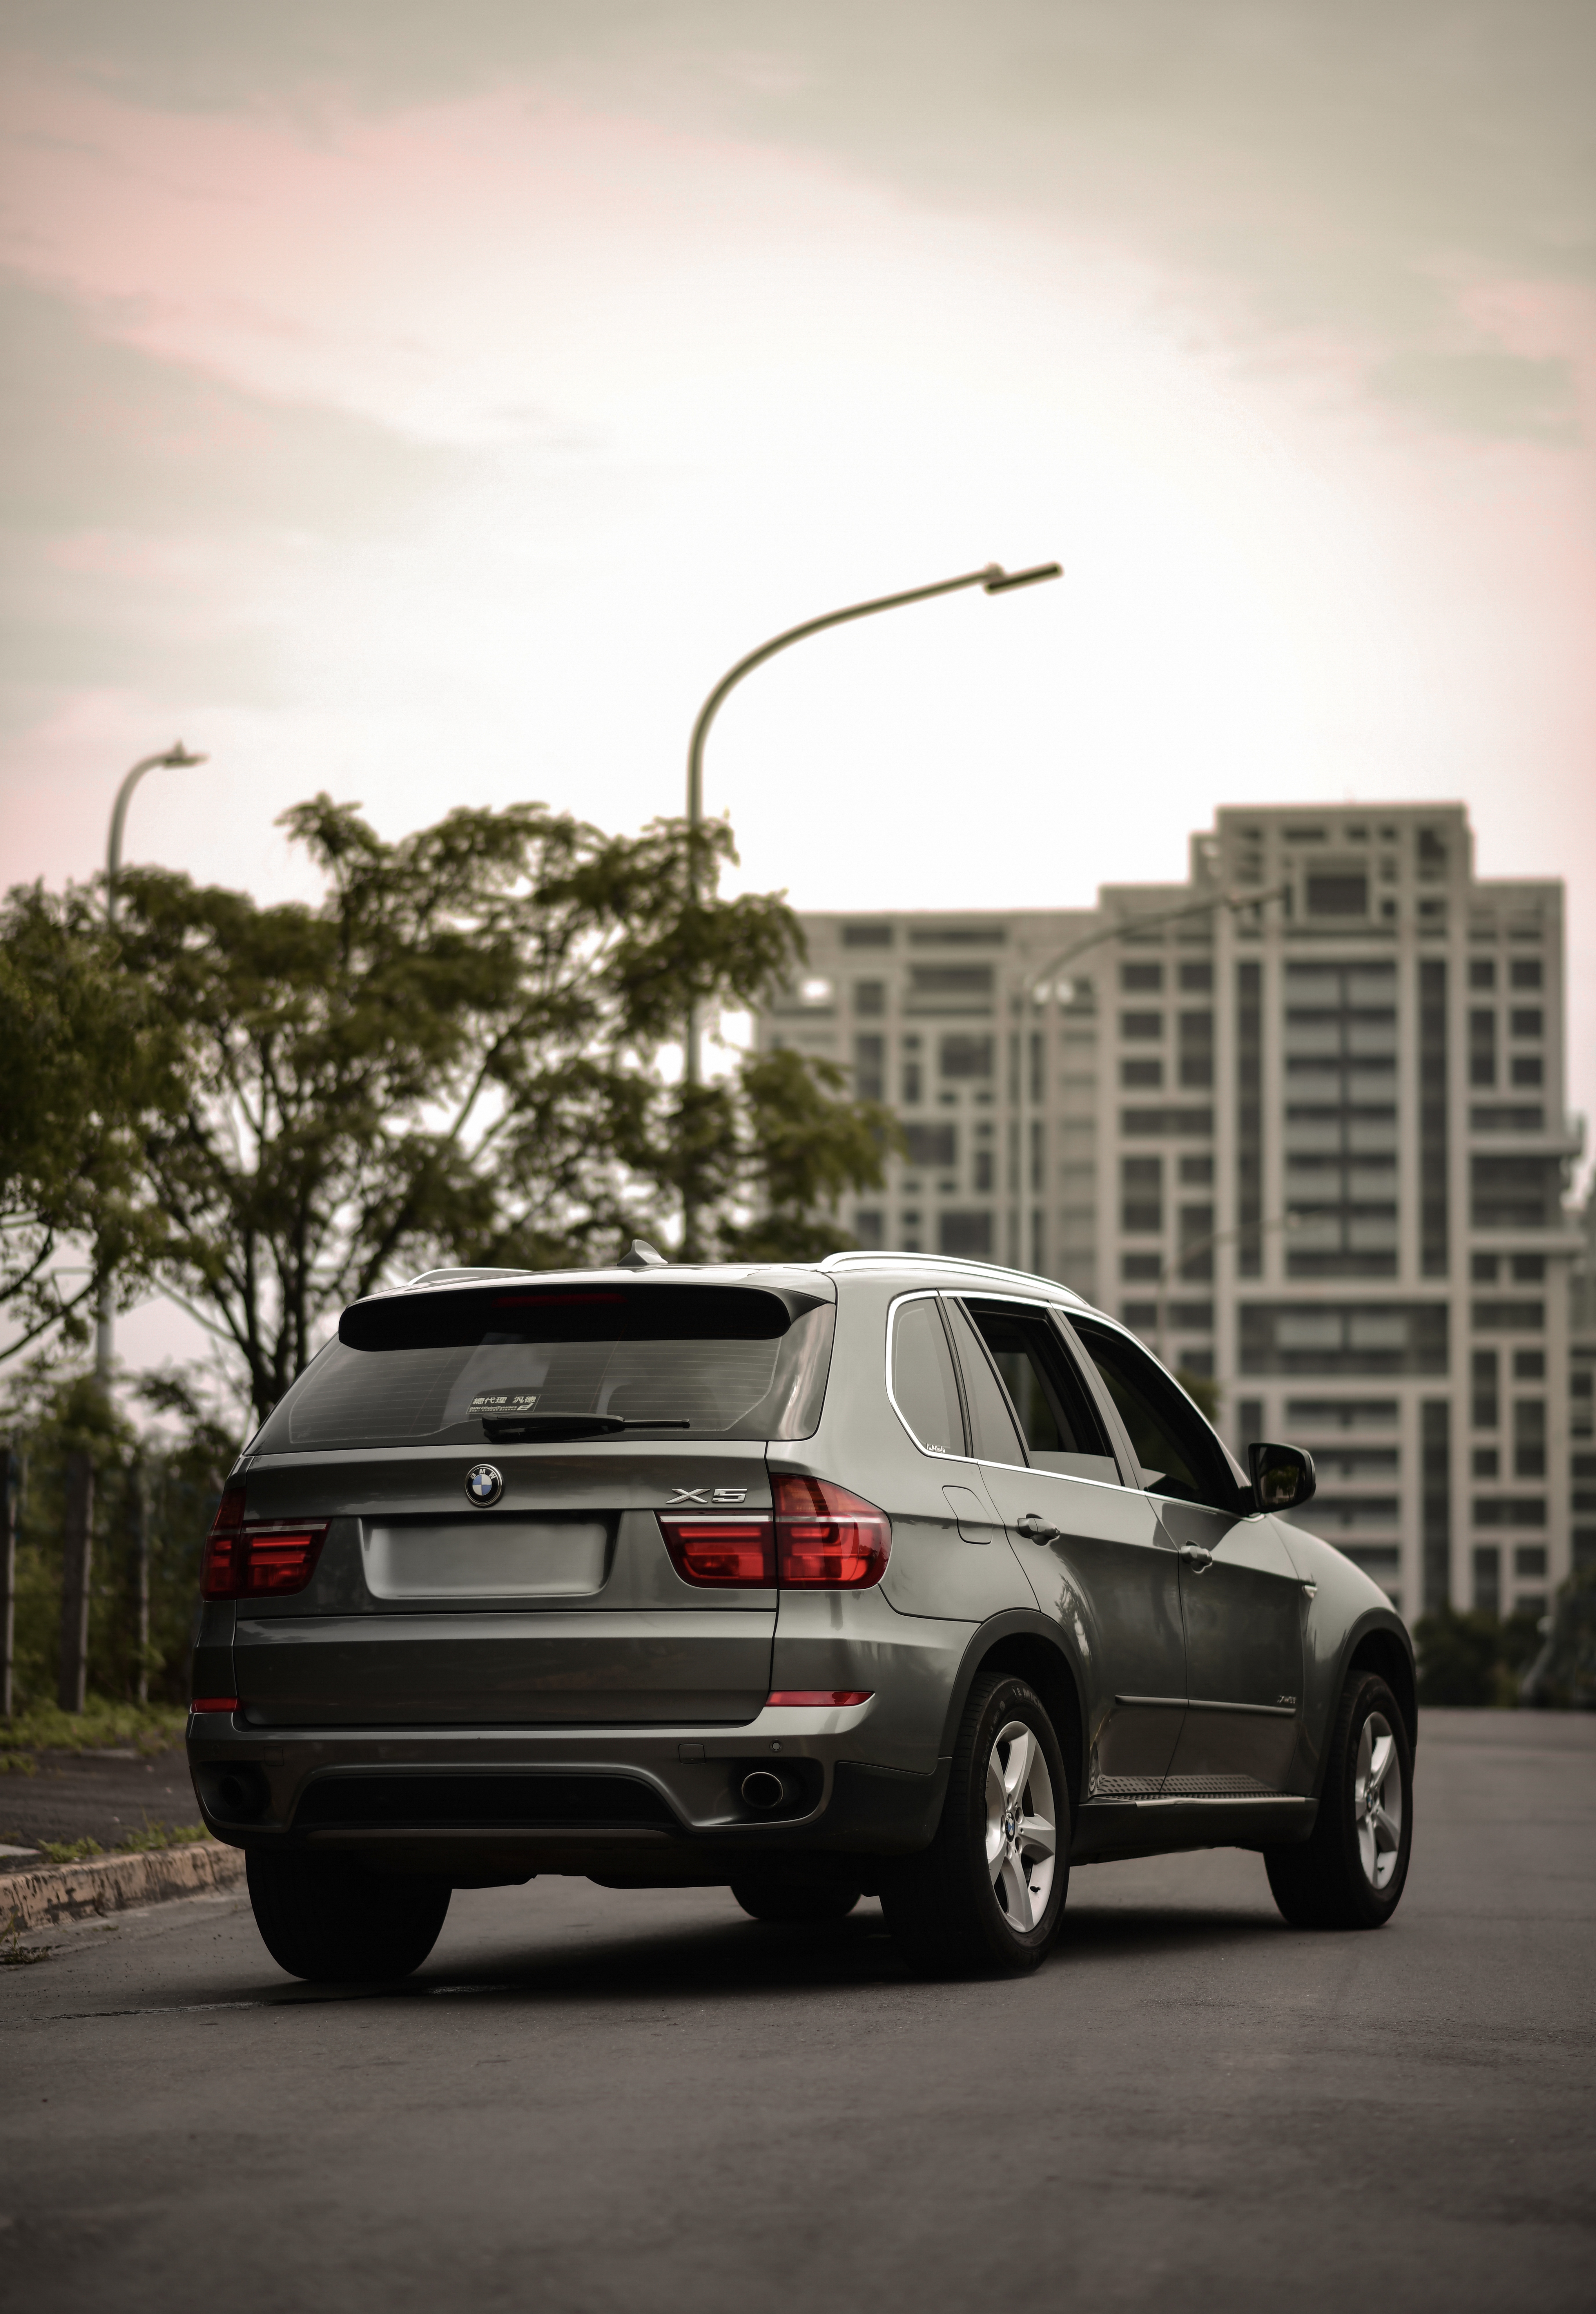 side view, bmw, cars, suv, bmw x5 Image for desktop